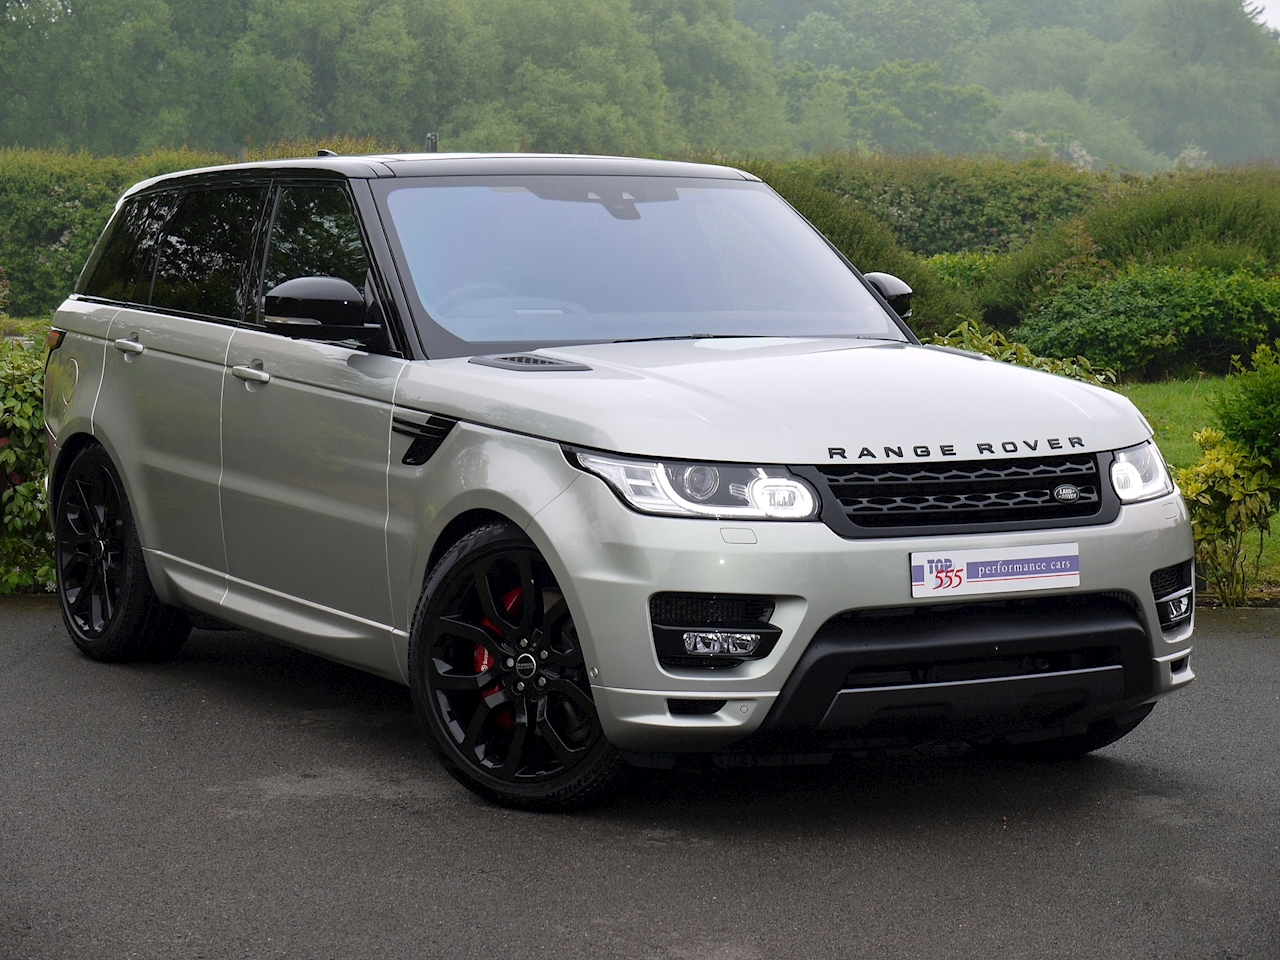 Used Land Rover Range Rover Sport 4.4 SDV8 Autobiography